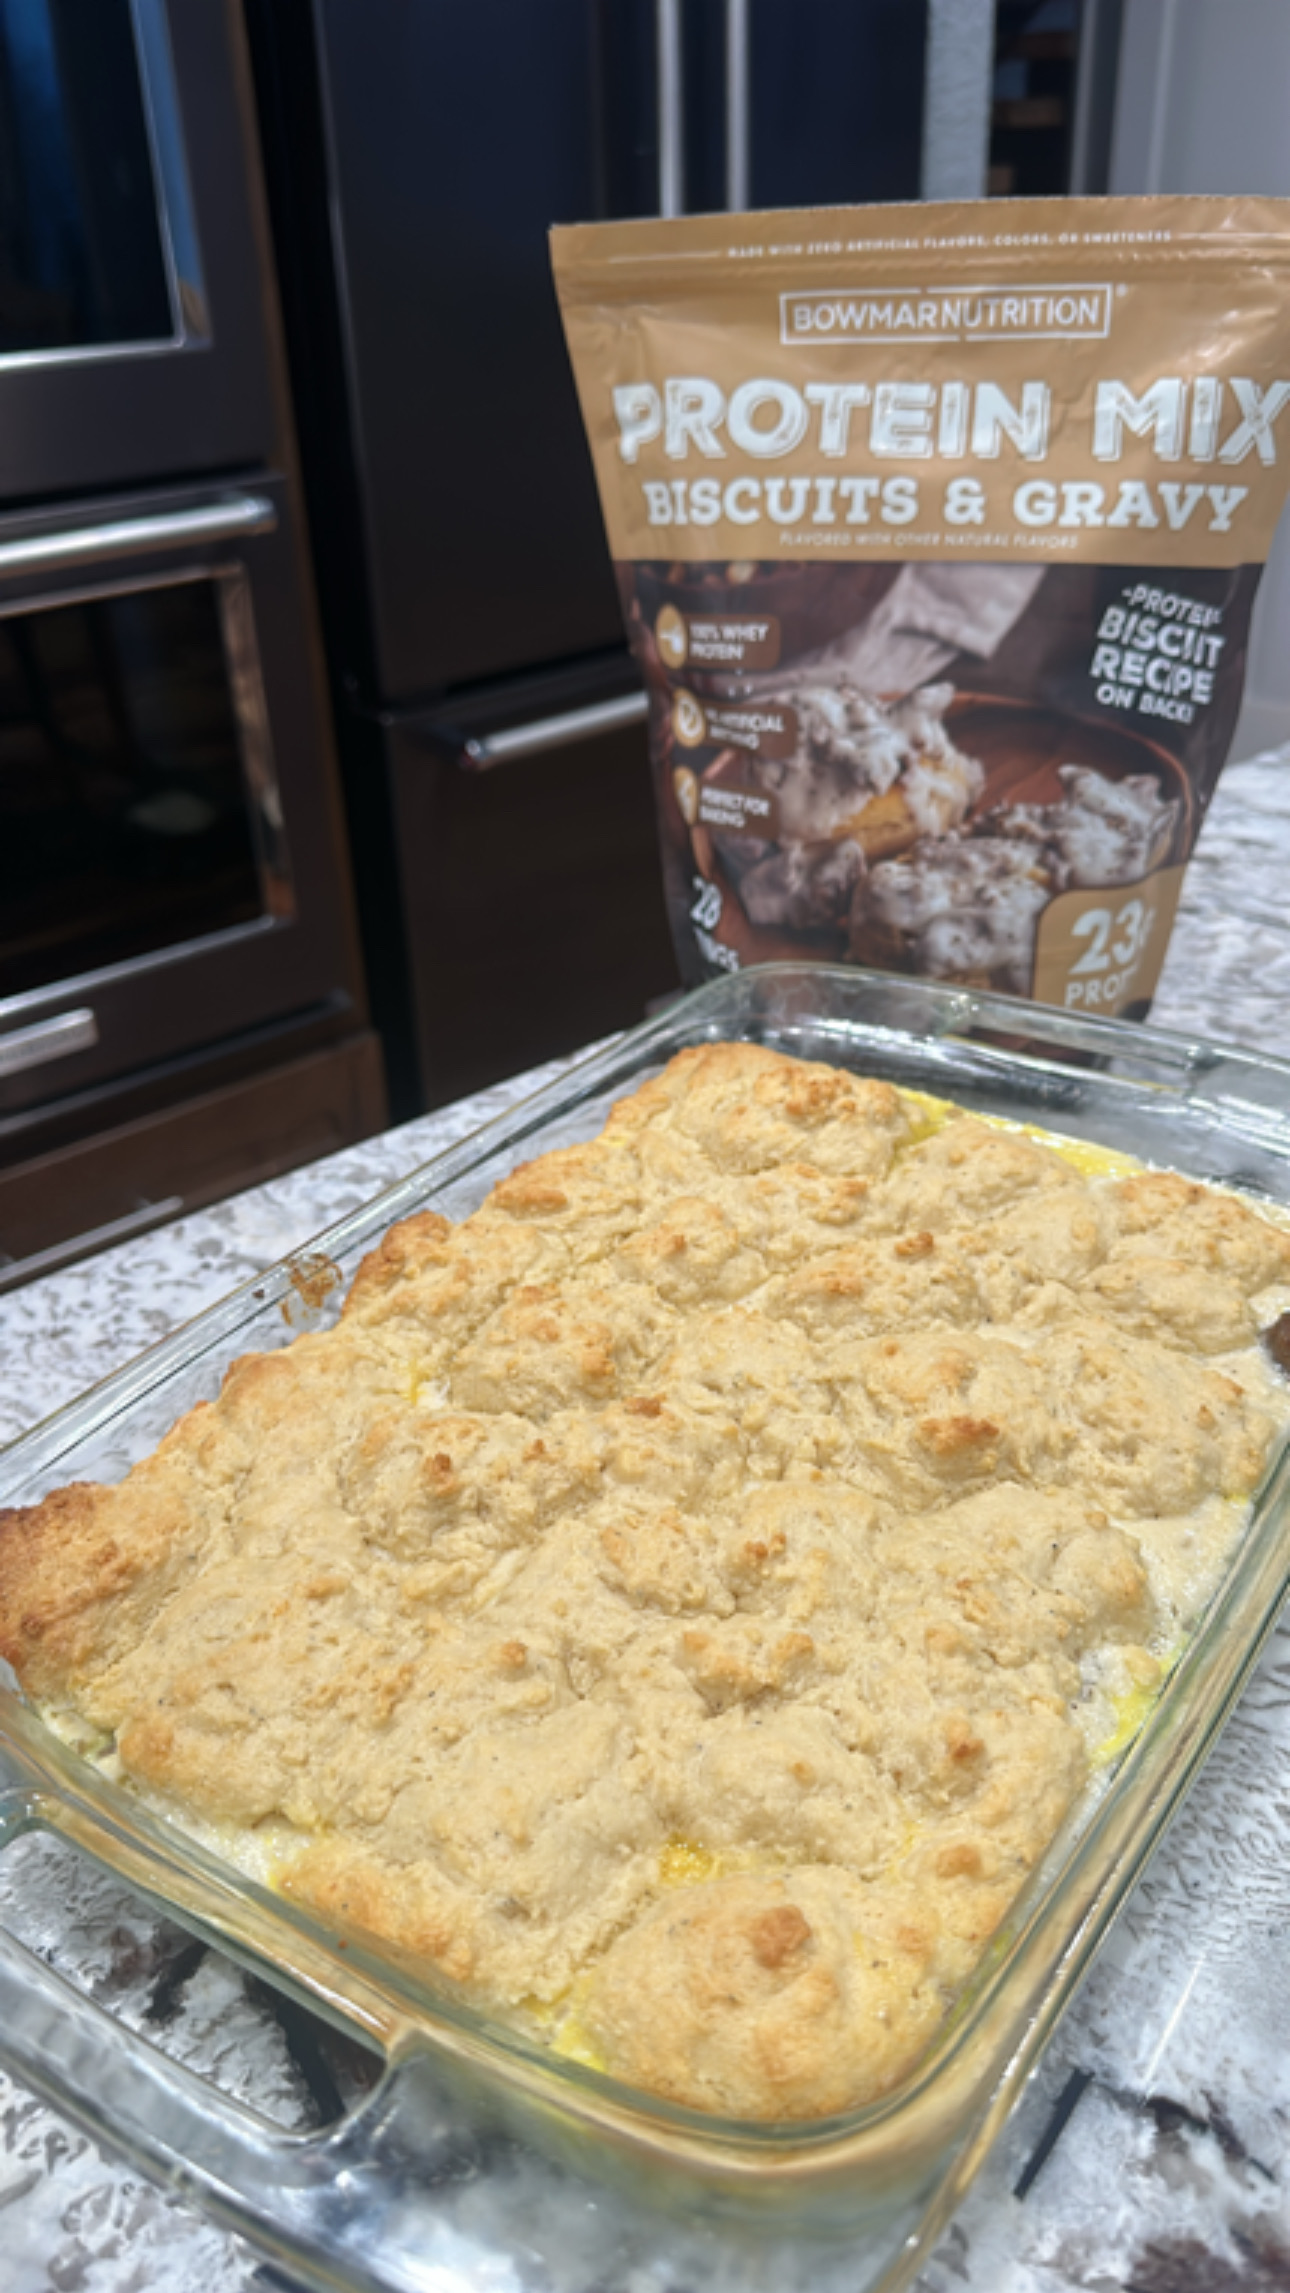 Venison Biscuits and Gravy Casserole (with protein biscuits)